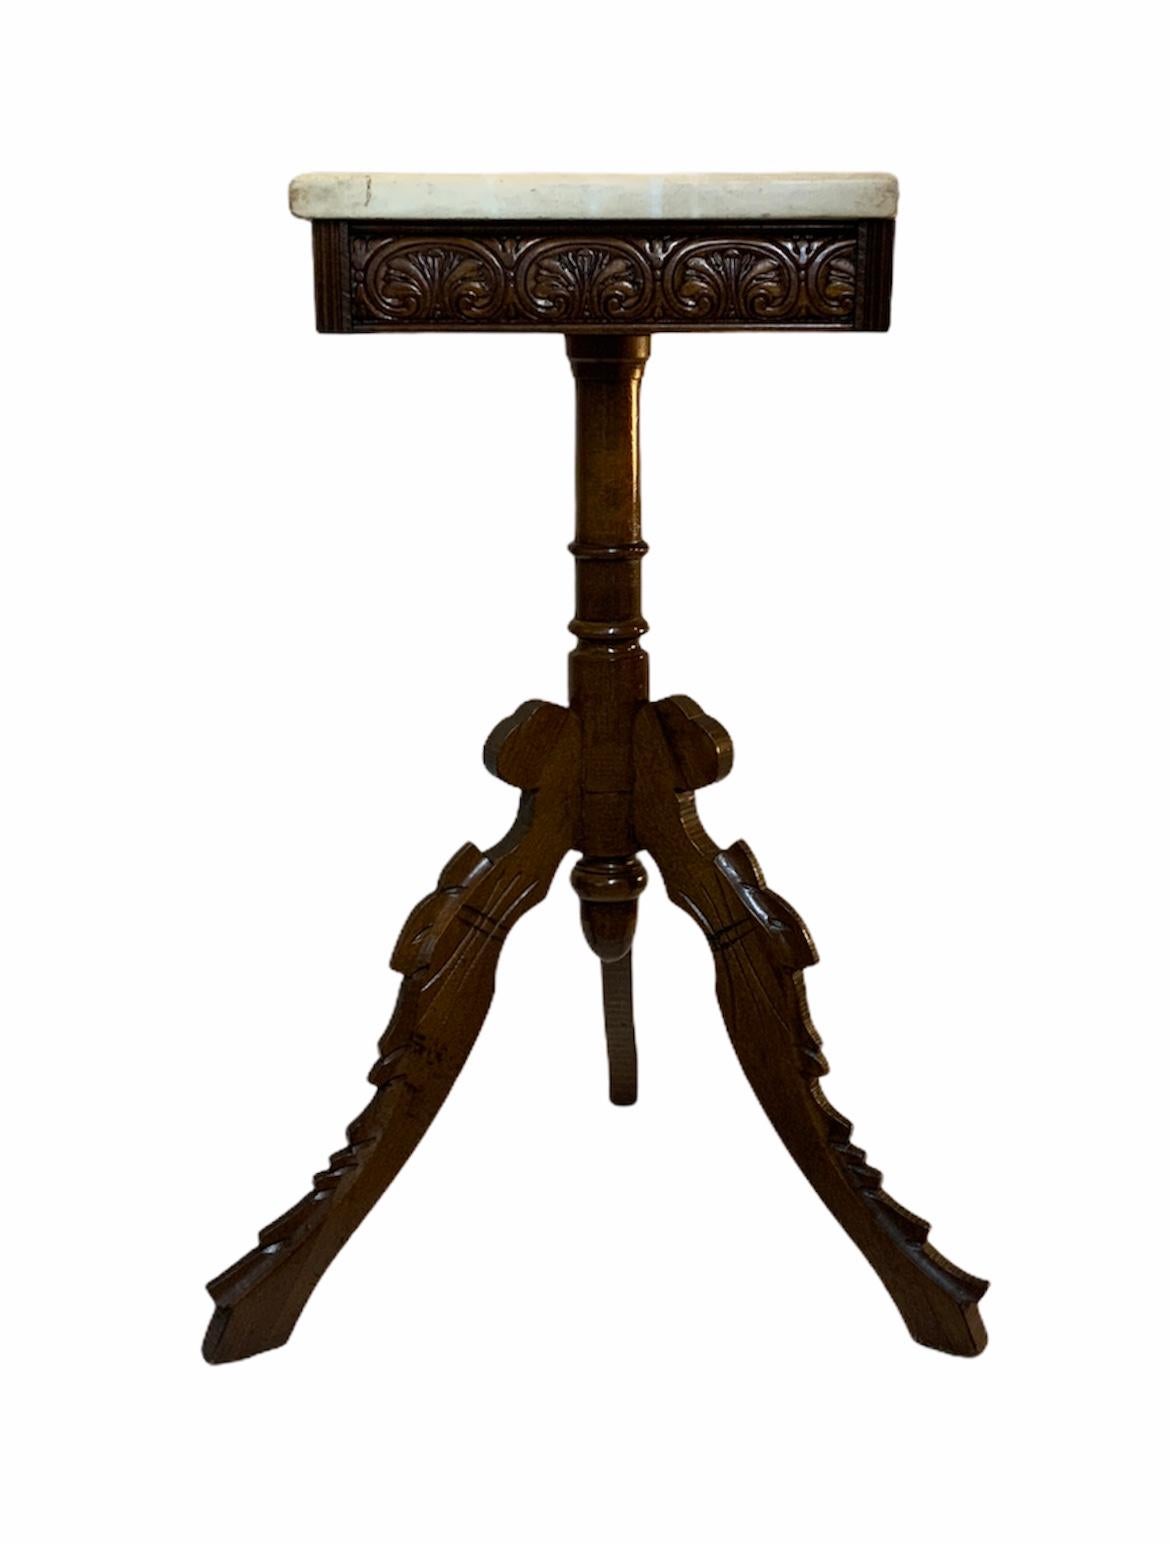 This is a charming tripod side table with a rectangular marble top. The upper wood base depicts a carving frieze with oval medals adorned in the center by 